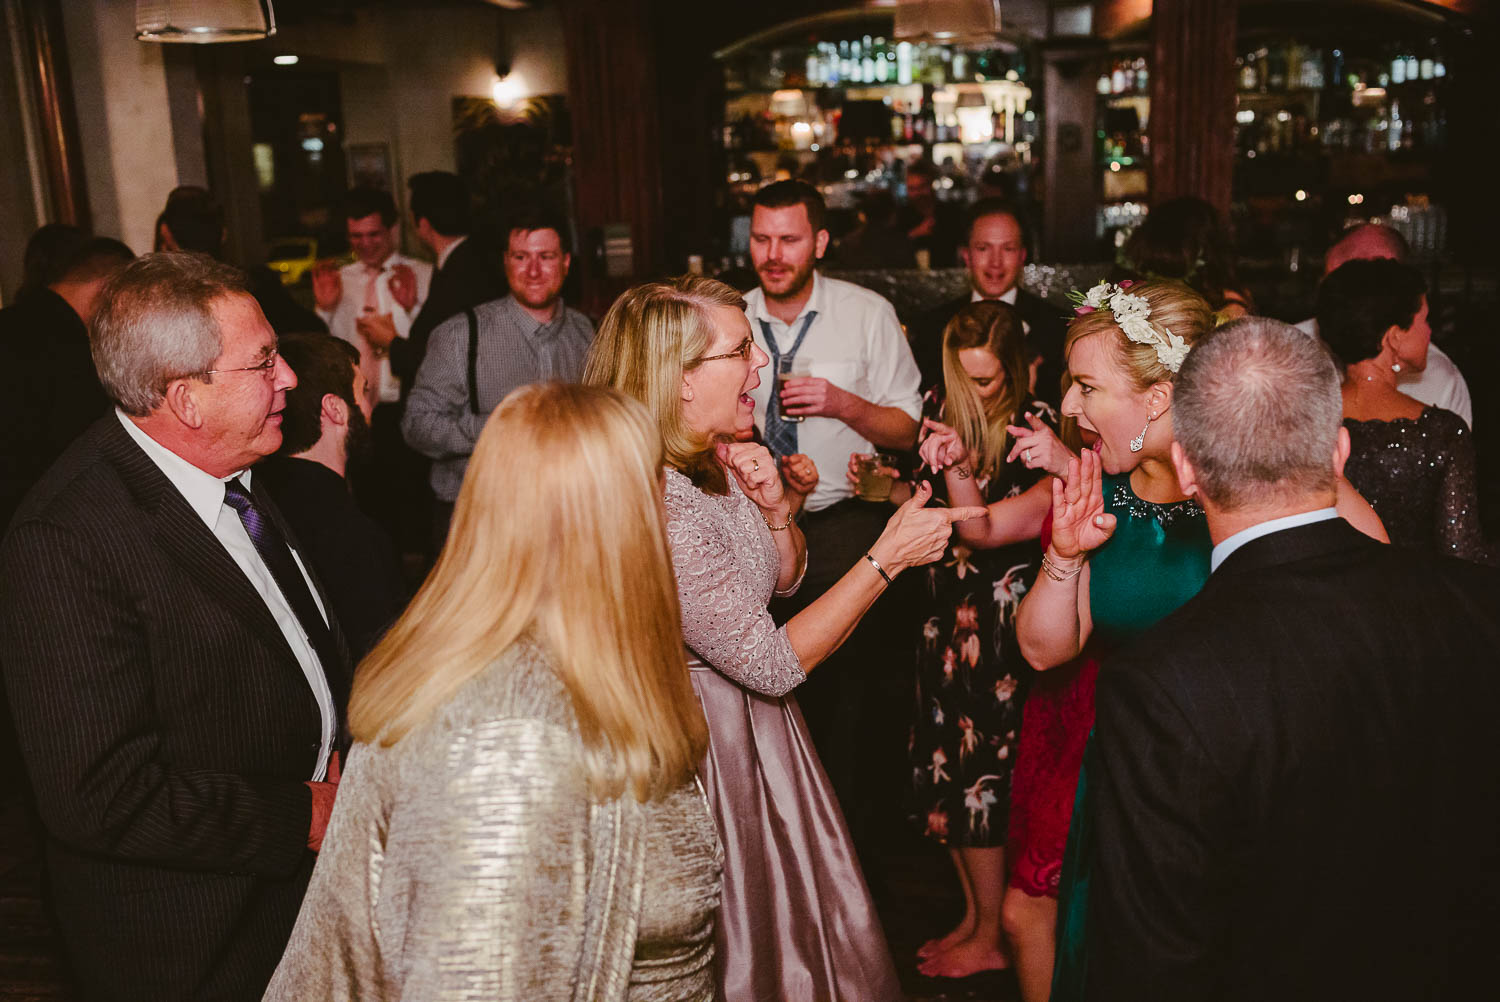 Bride and mother dance together surrounded by friends and family at Republic Takoma Park Washington D.C-Leica Wedding photographer-Philip Thomas